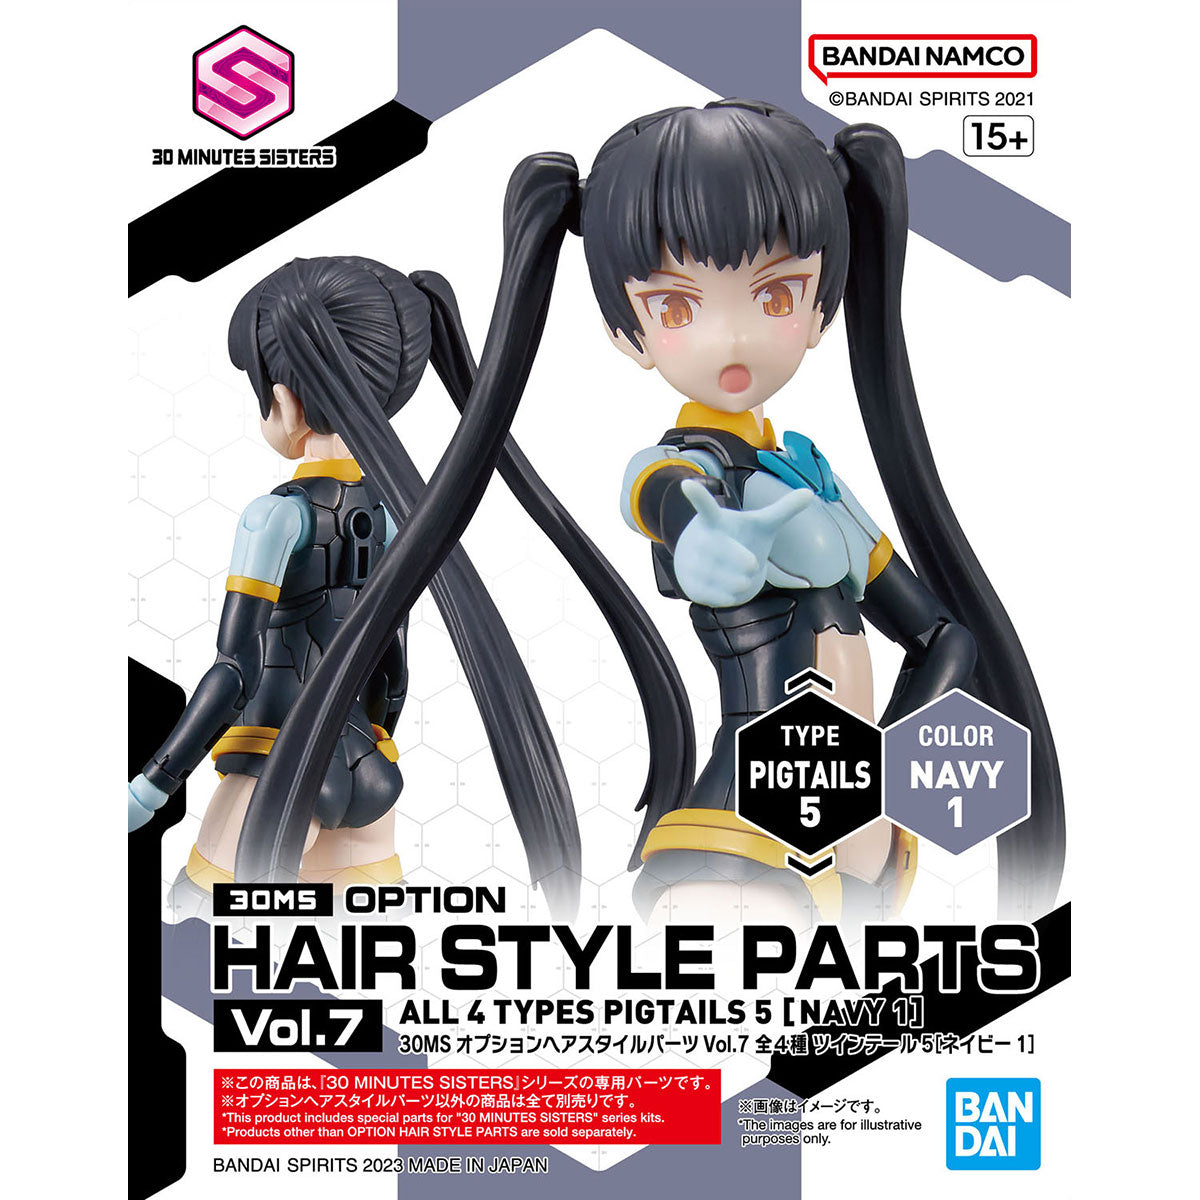 30MS Option Hairstyle Parts Vol.7 All 4 Types Long Hair 2